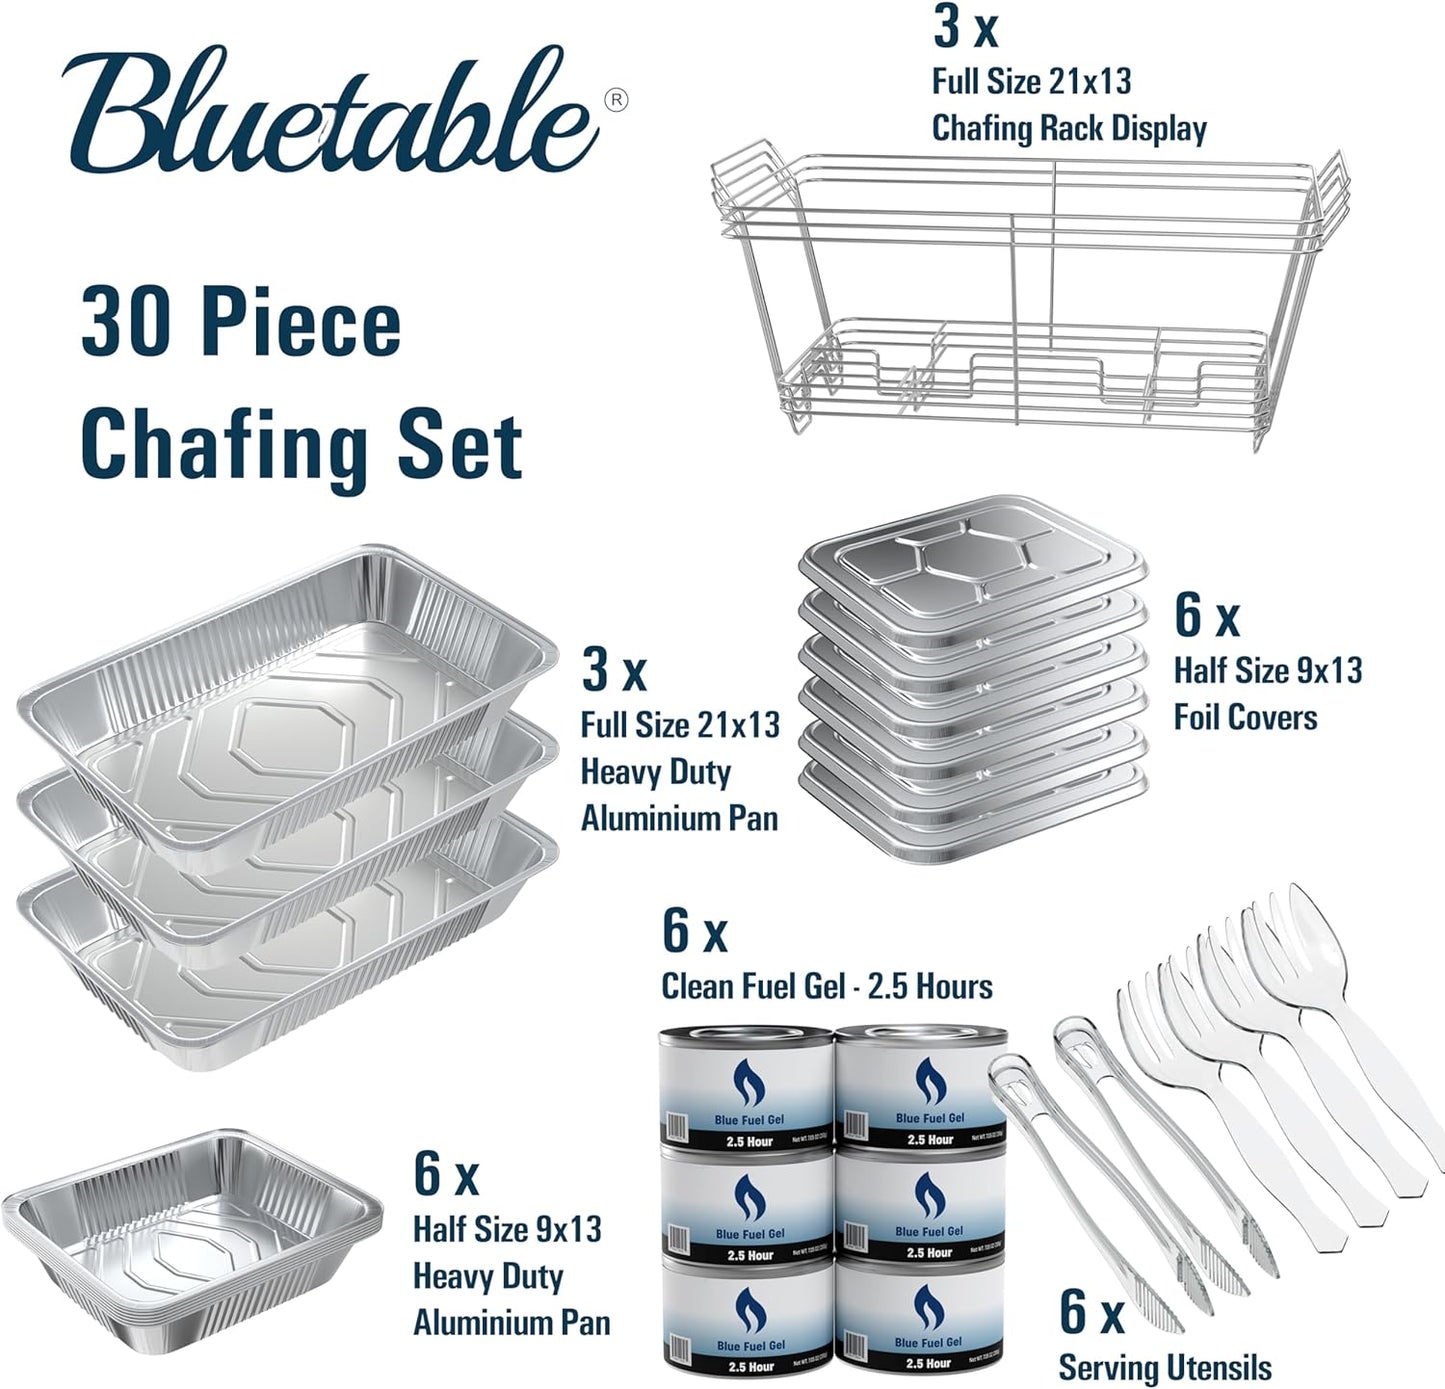 Chafing Dish Buffet Set Disposable - Chafing Dishes for Buffet Kit [30 Piece Set] Food Warmers for Parties - 2.5 Hour Fuel Cans, Wire Racks, Aluminum Pans, Covers, Servers Supplies [Full Size Set]